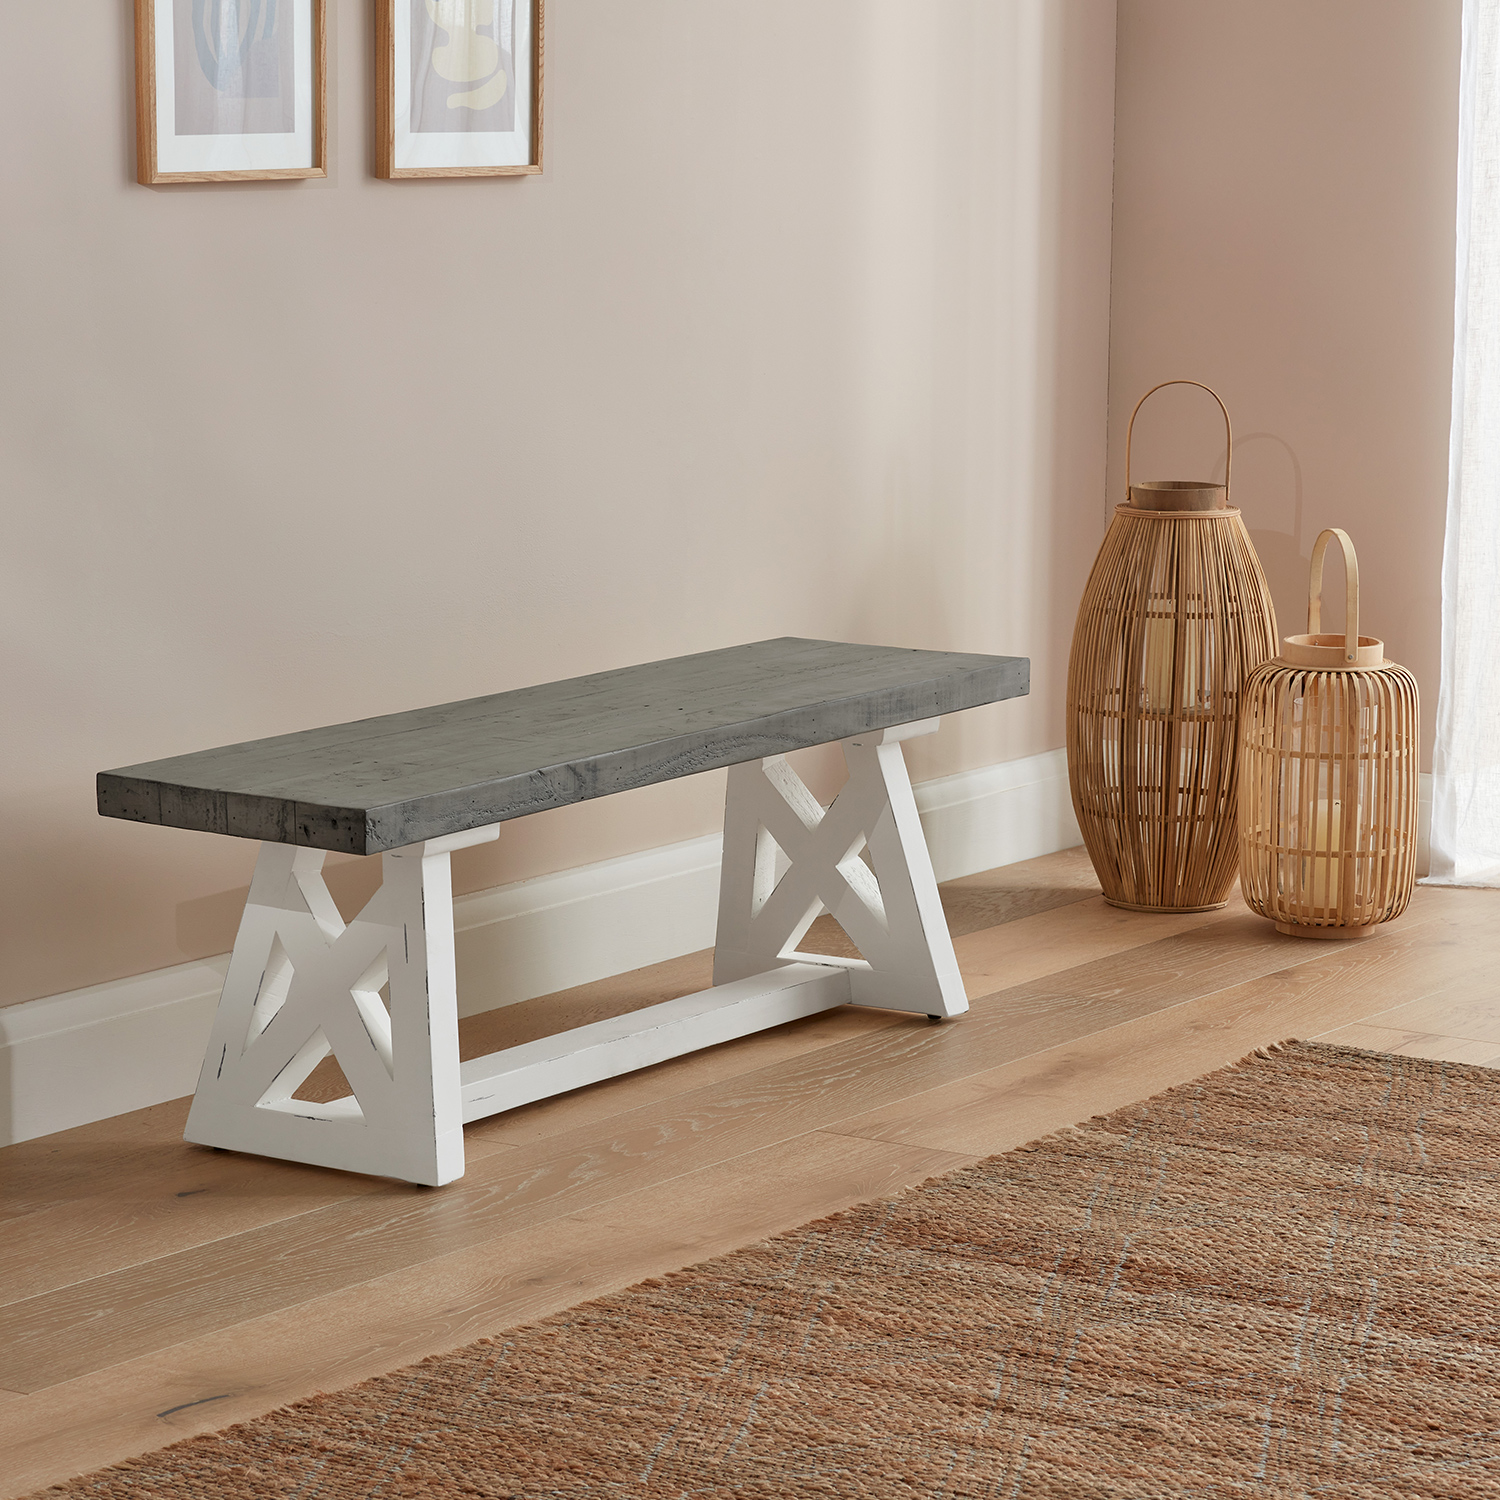 White and Grey small dining bench placed in a wooden hallway with ornamental wicker lanterns placed next to it